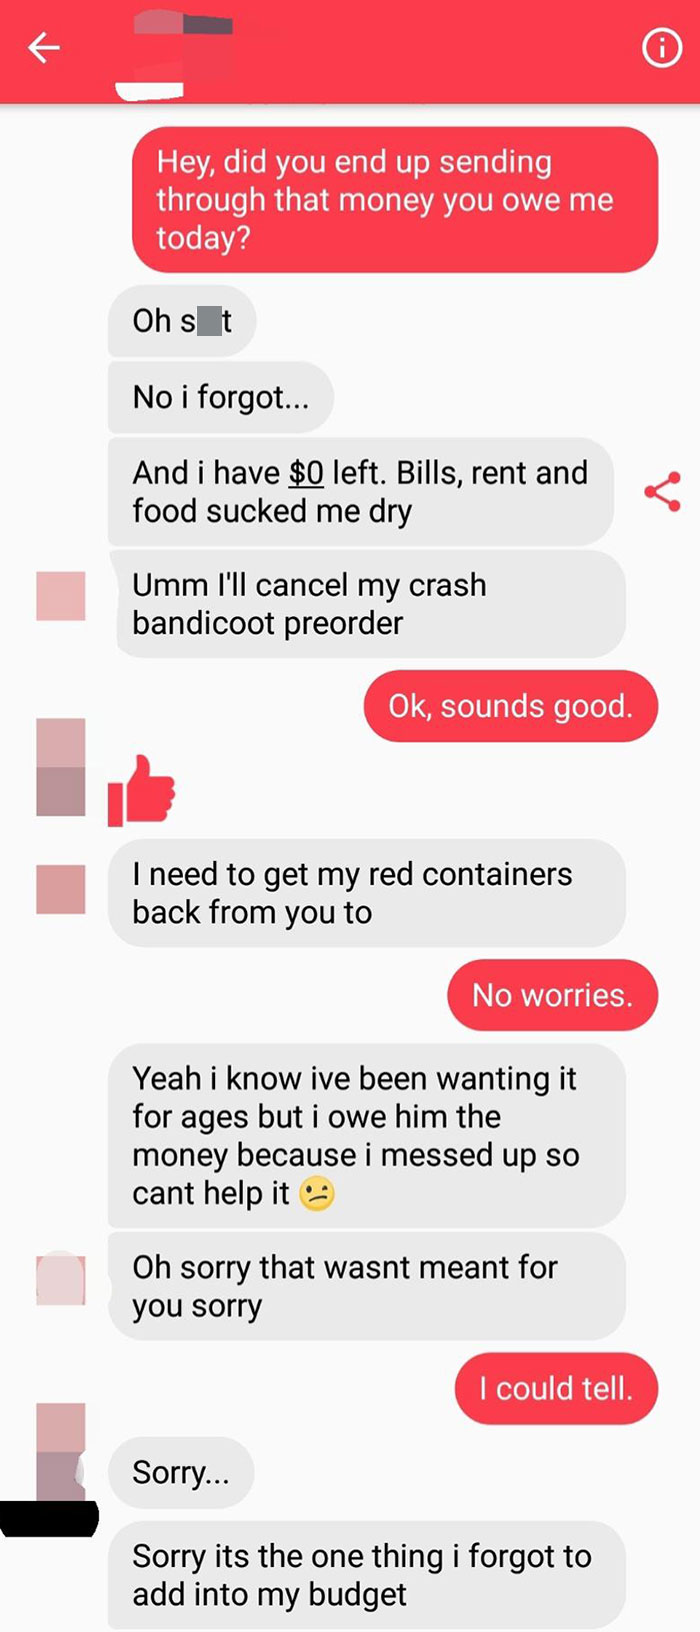 Ex Tries To Guilt Me A Week After Promising To Pay Back $30 For "Accidentally" Using My Card To Pay For Food Delivery